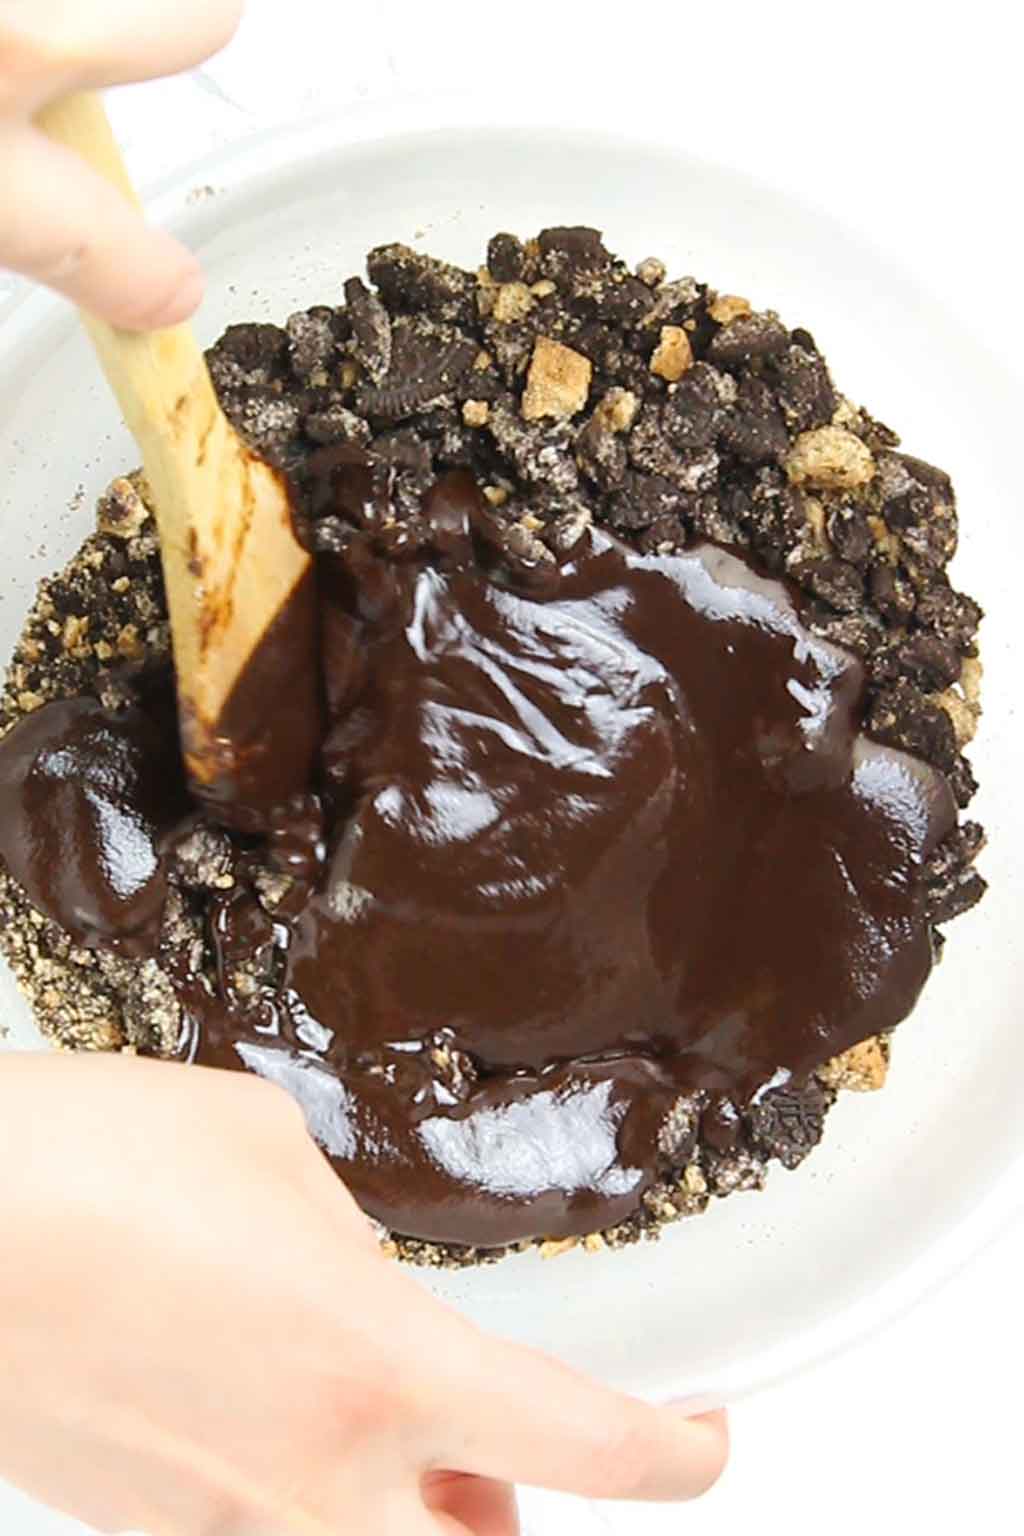 Mixing the chocolate into the cookie crumbs